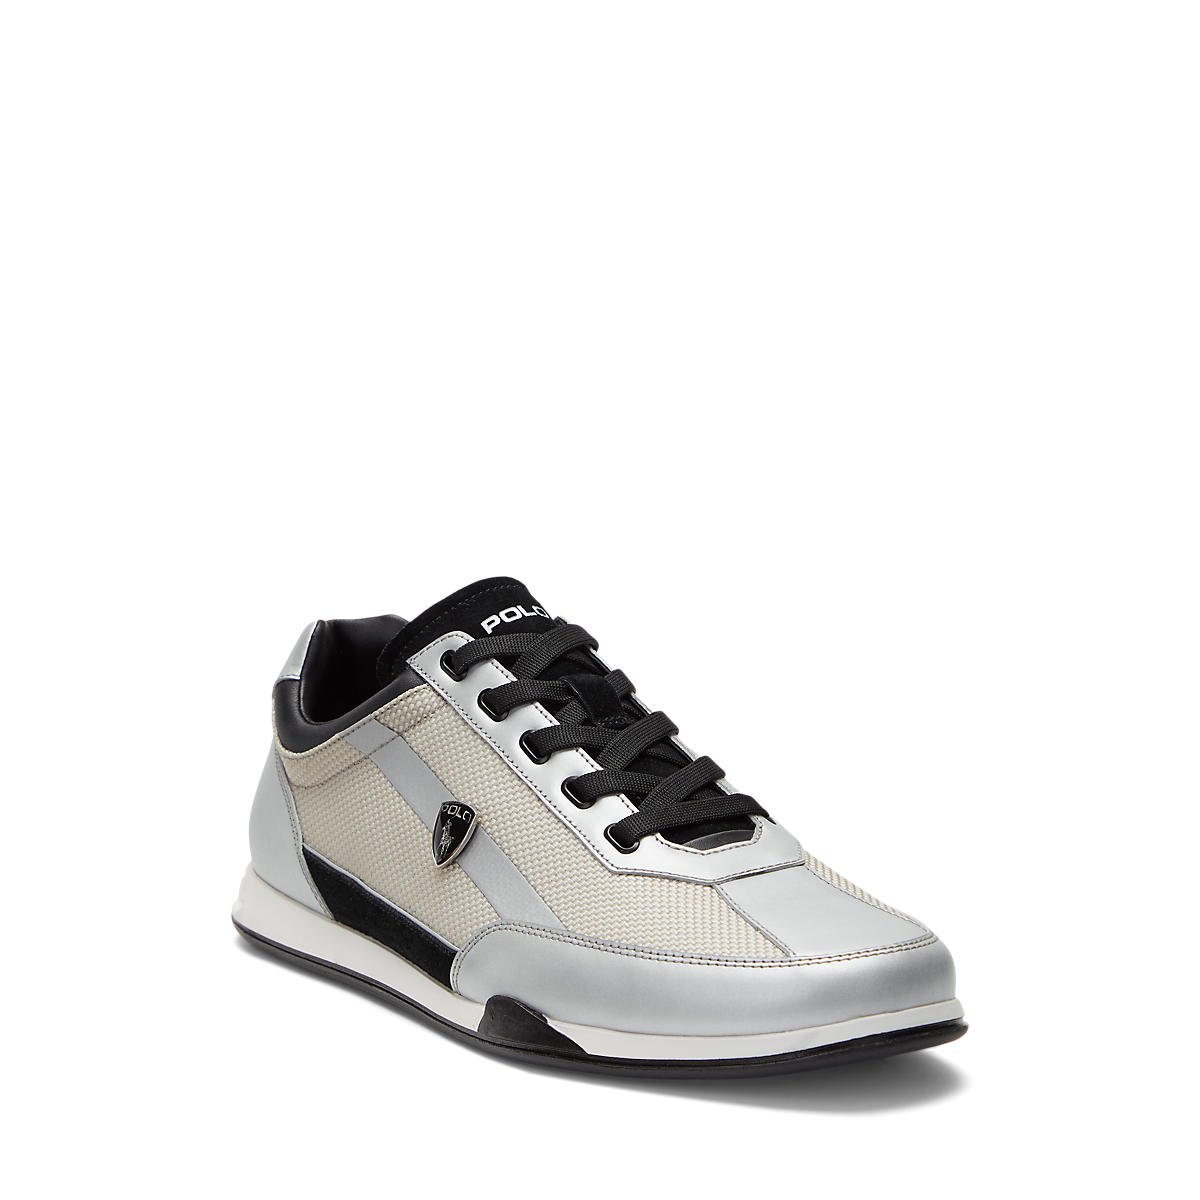 809878564001 Polo Ralph Lauren Irvine Sneakers Low Top Lace Silver, P6,545 from P9,350.jpeg